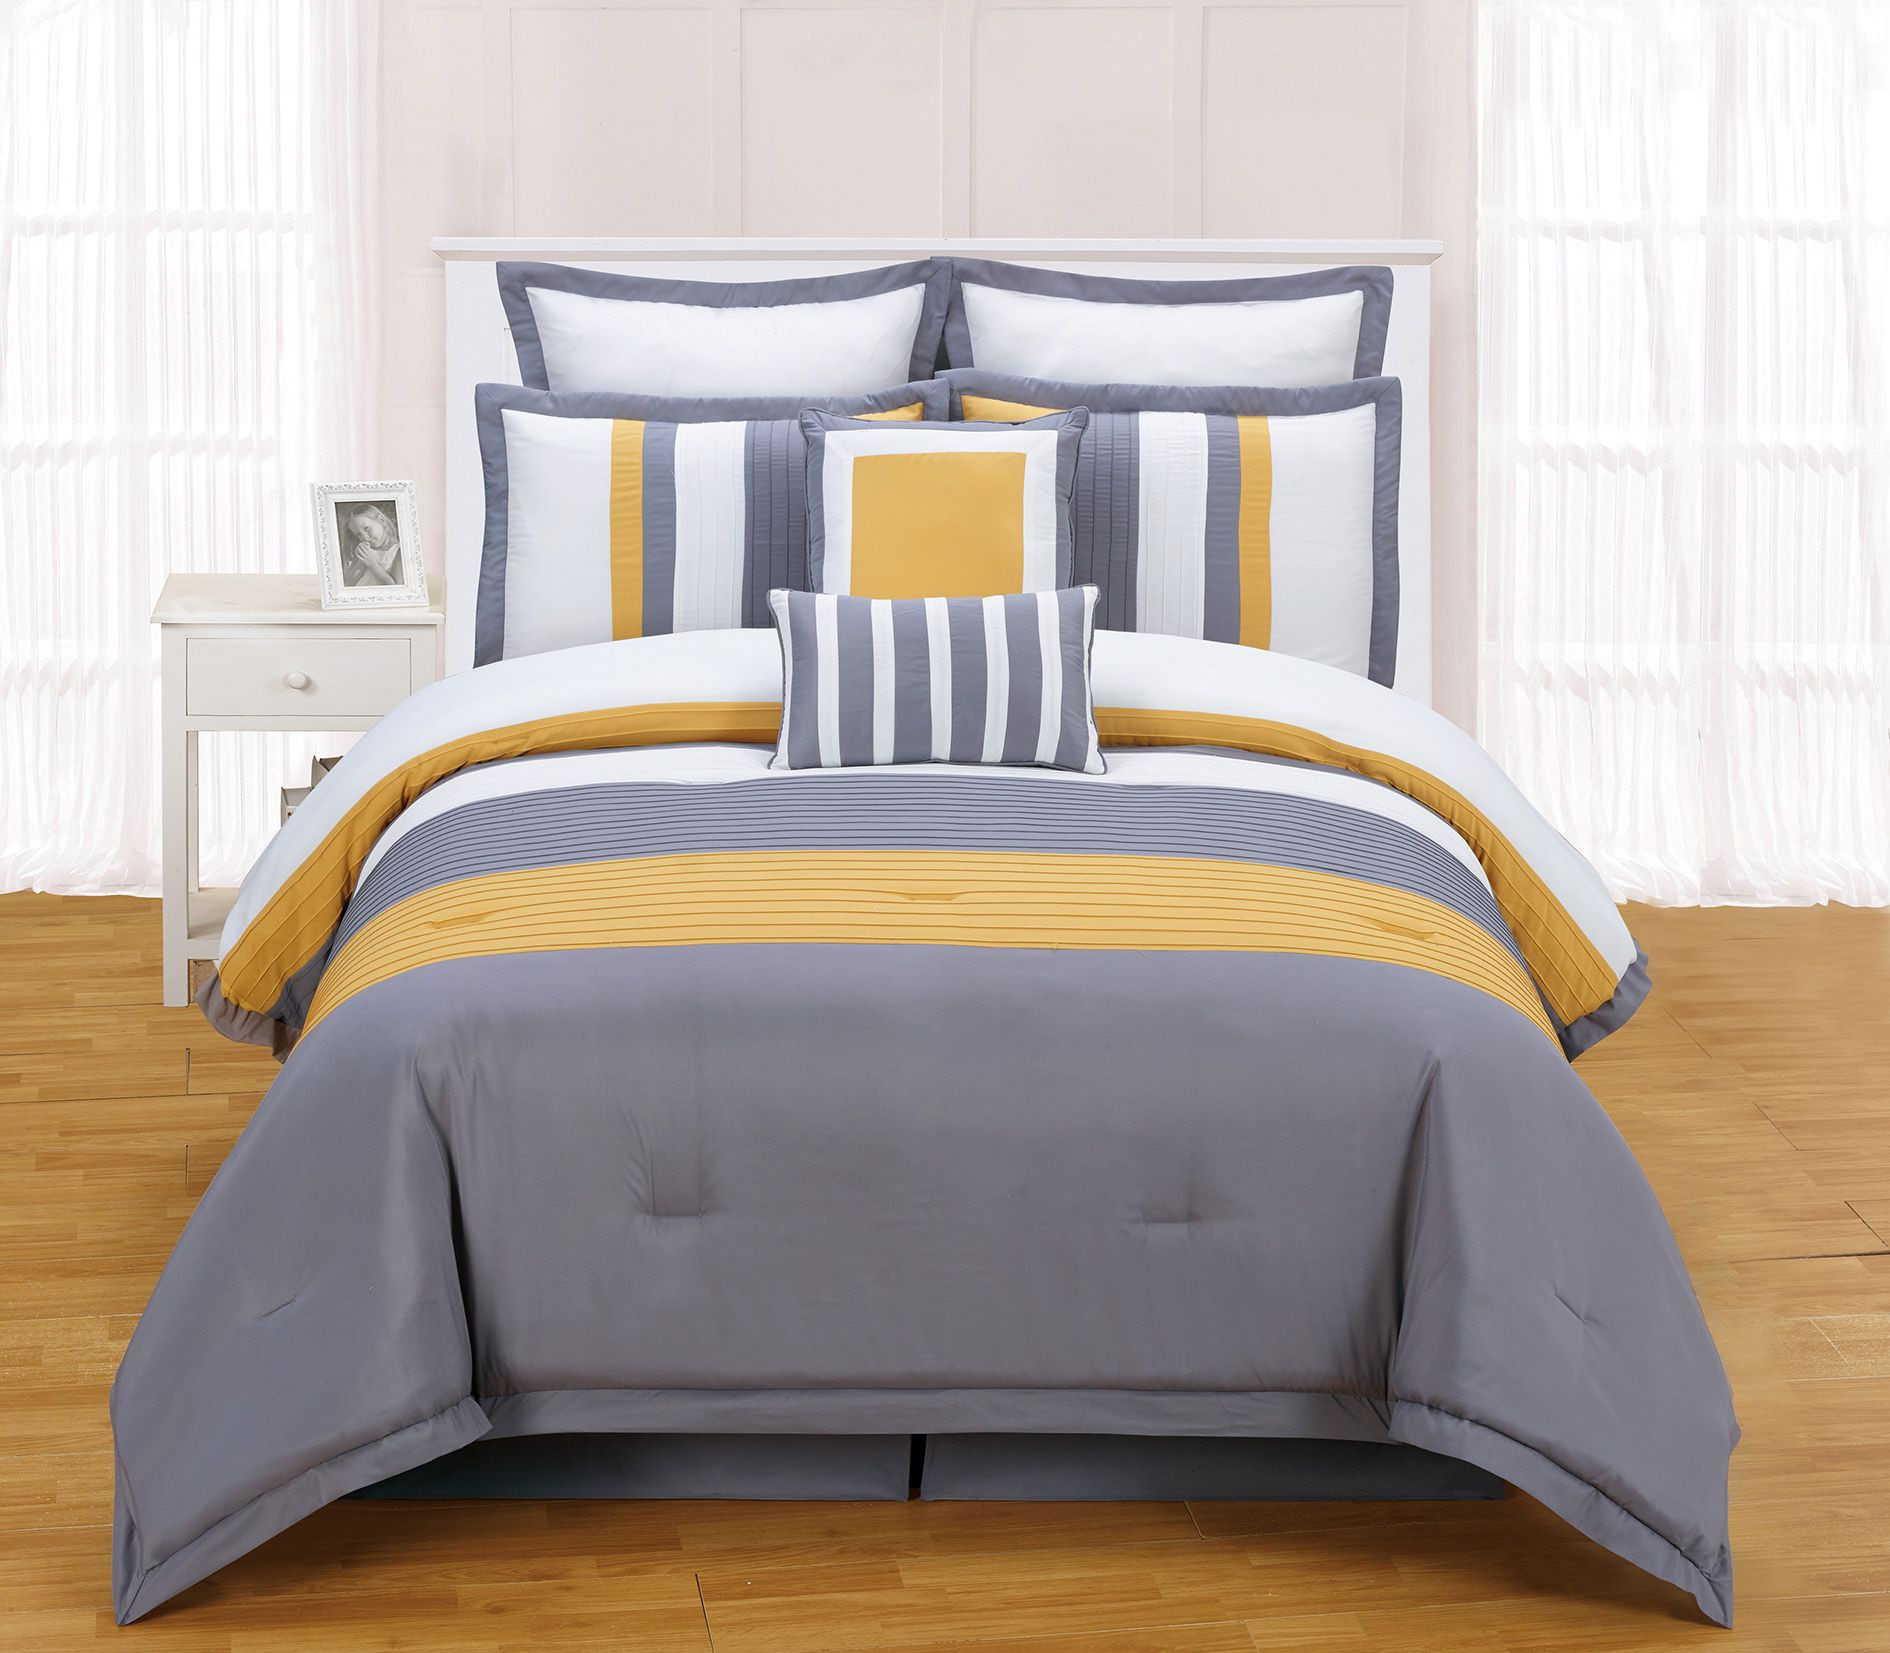 Master Bedroom Bedding Sets
 Rochester bedding by Duck River Textile